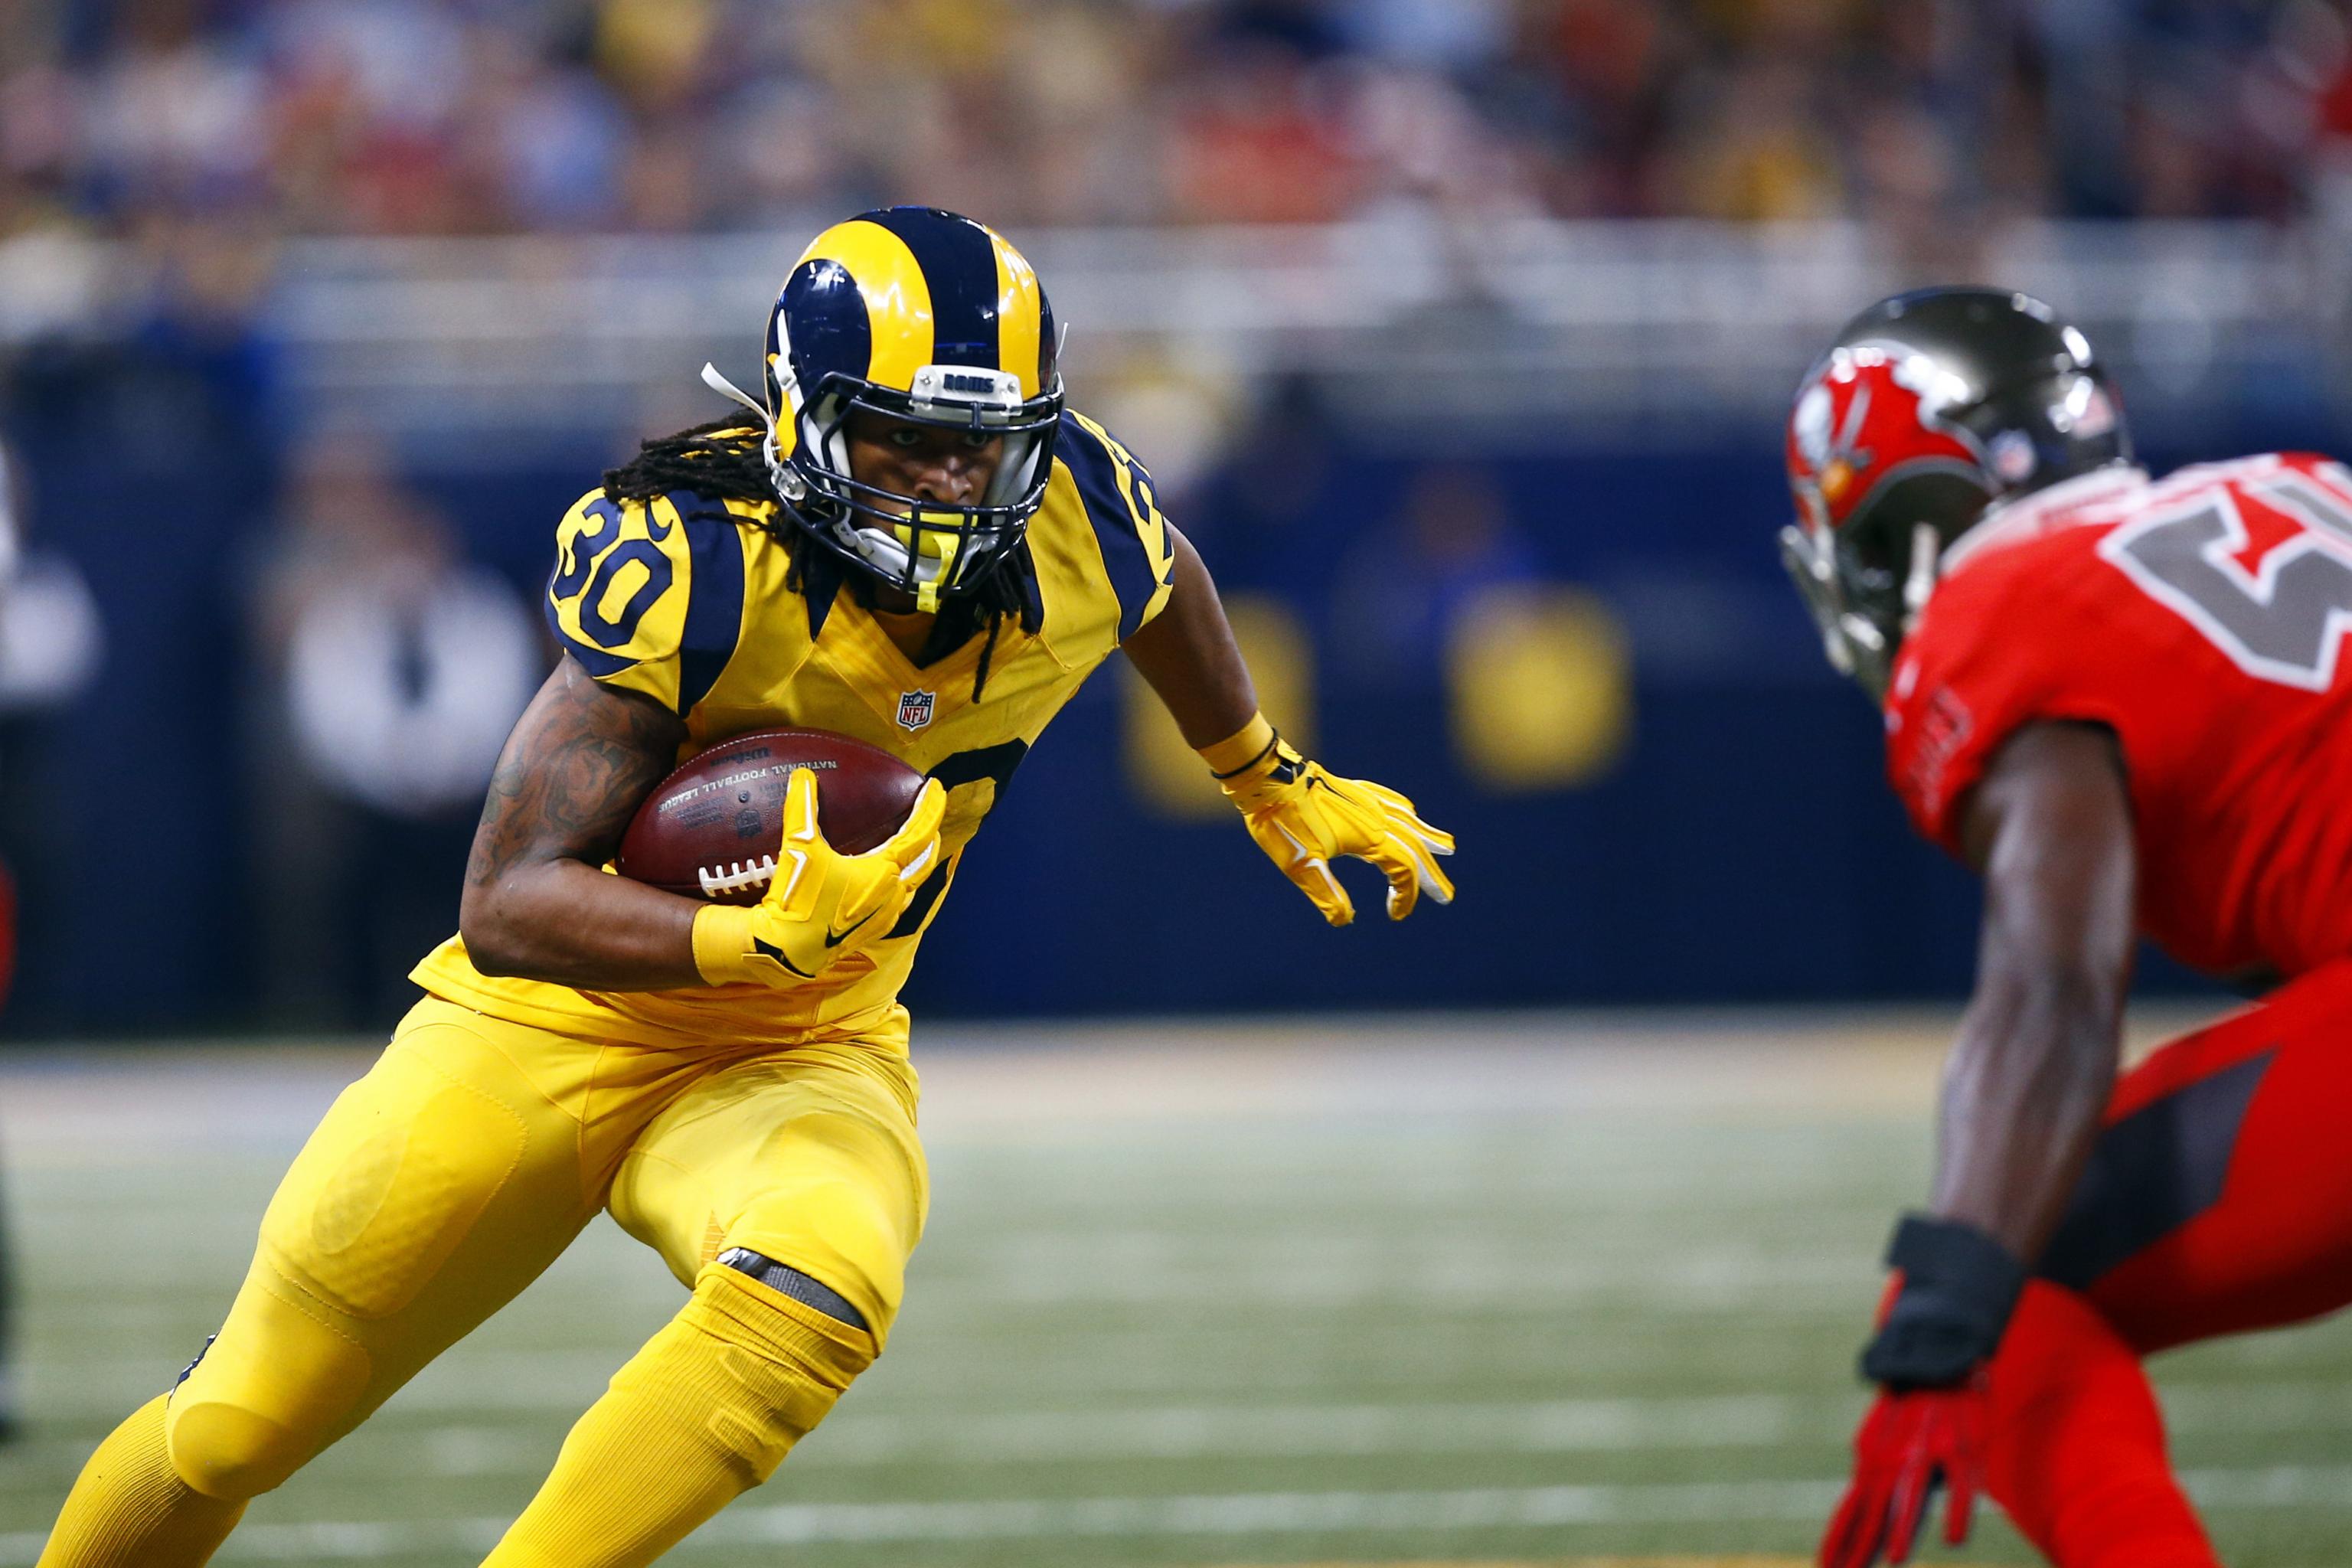 Todd Gurley Becomes 3rd Rookie in Rams History to Reach 1,000